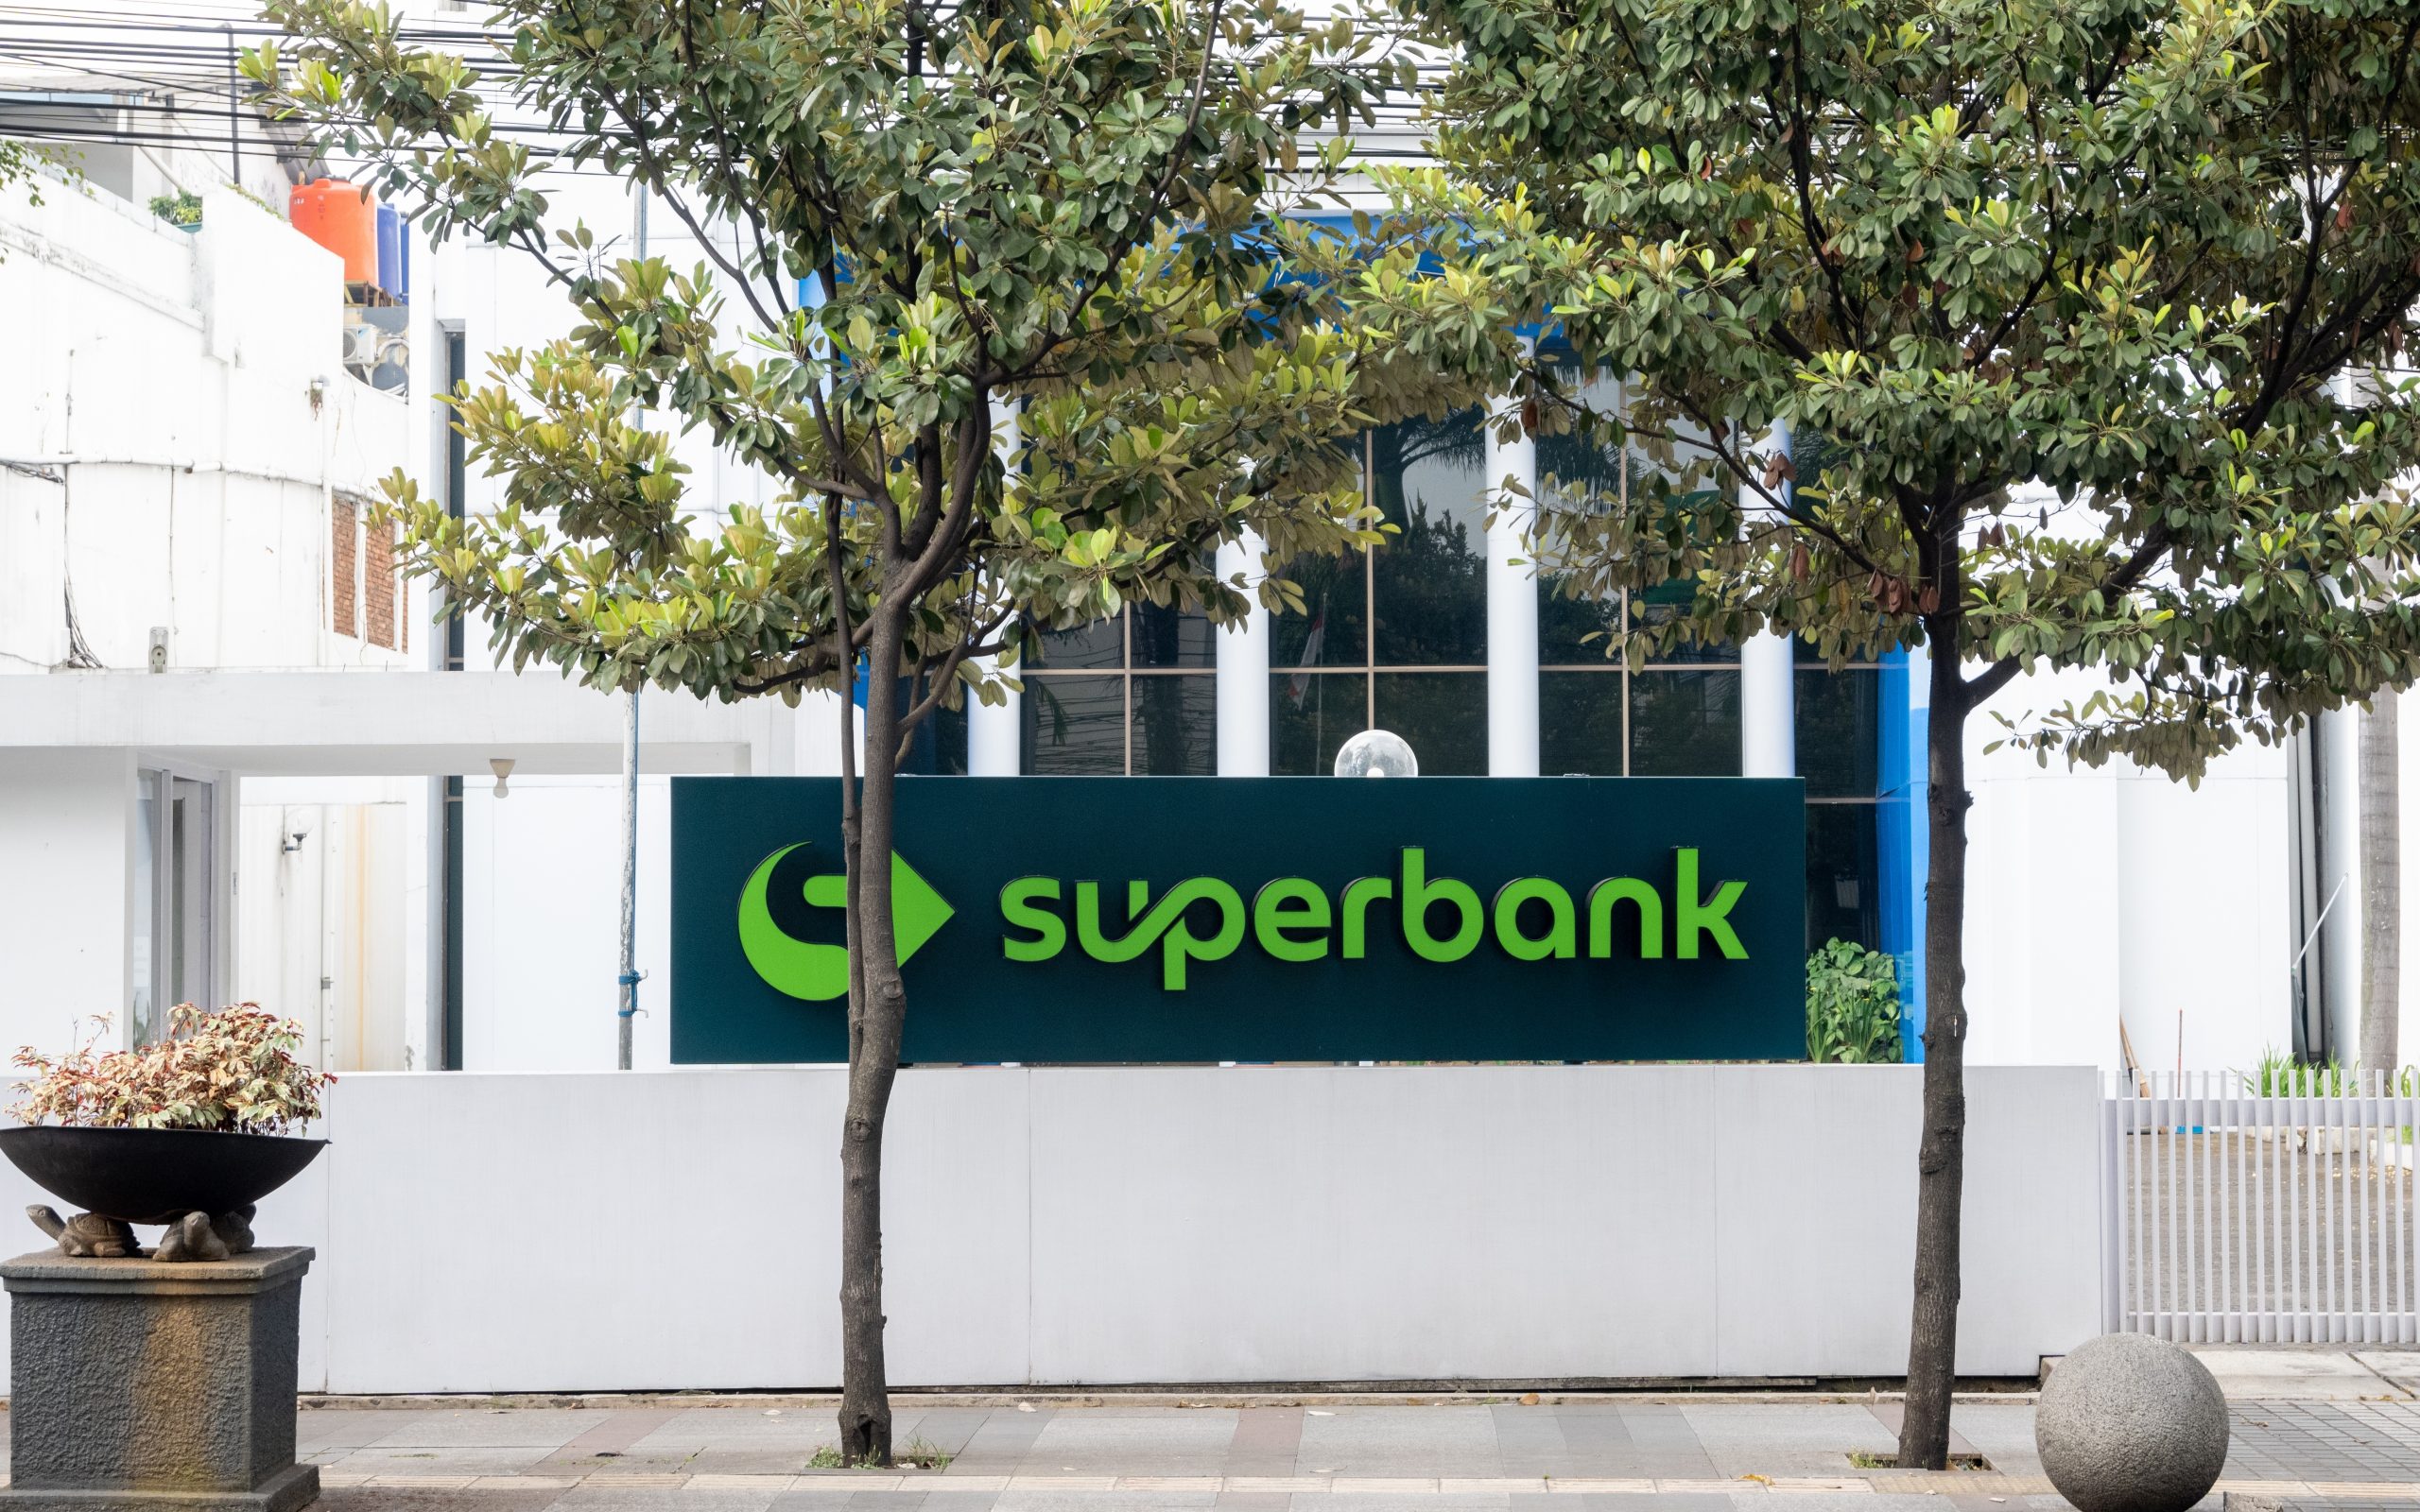 Grab-backed Superbank introduces auto-savings product in Indonesia